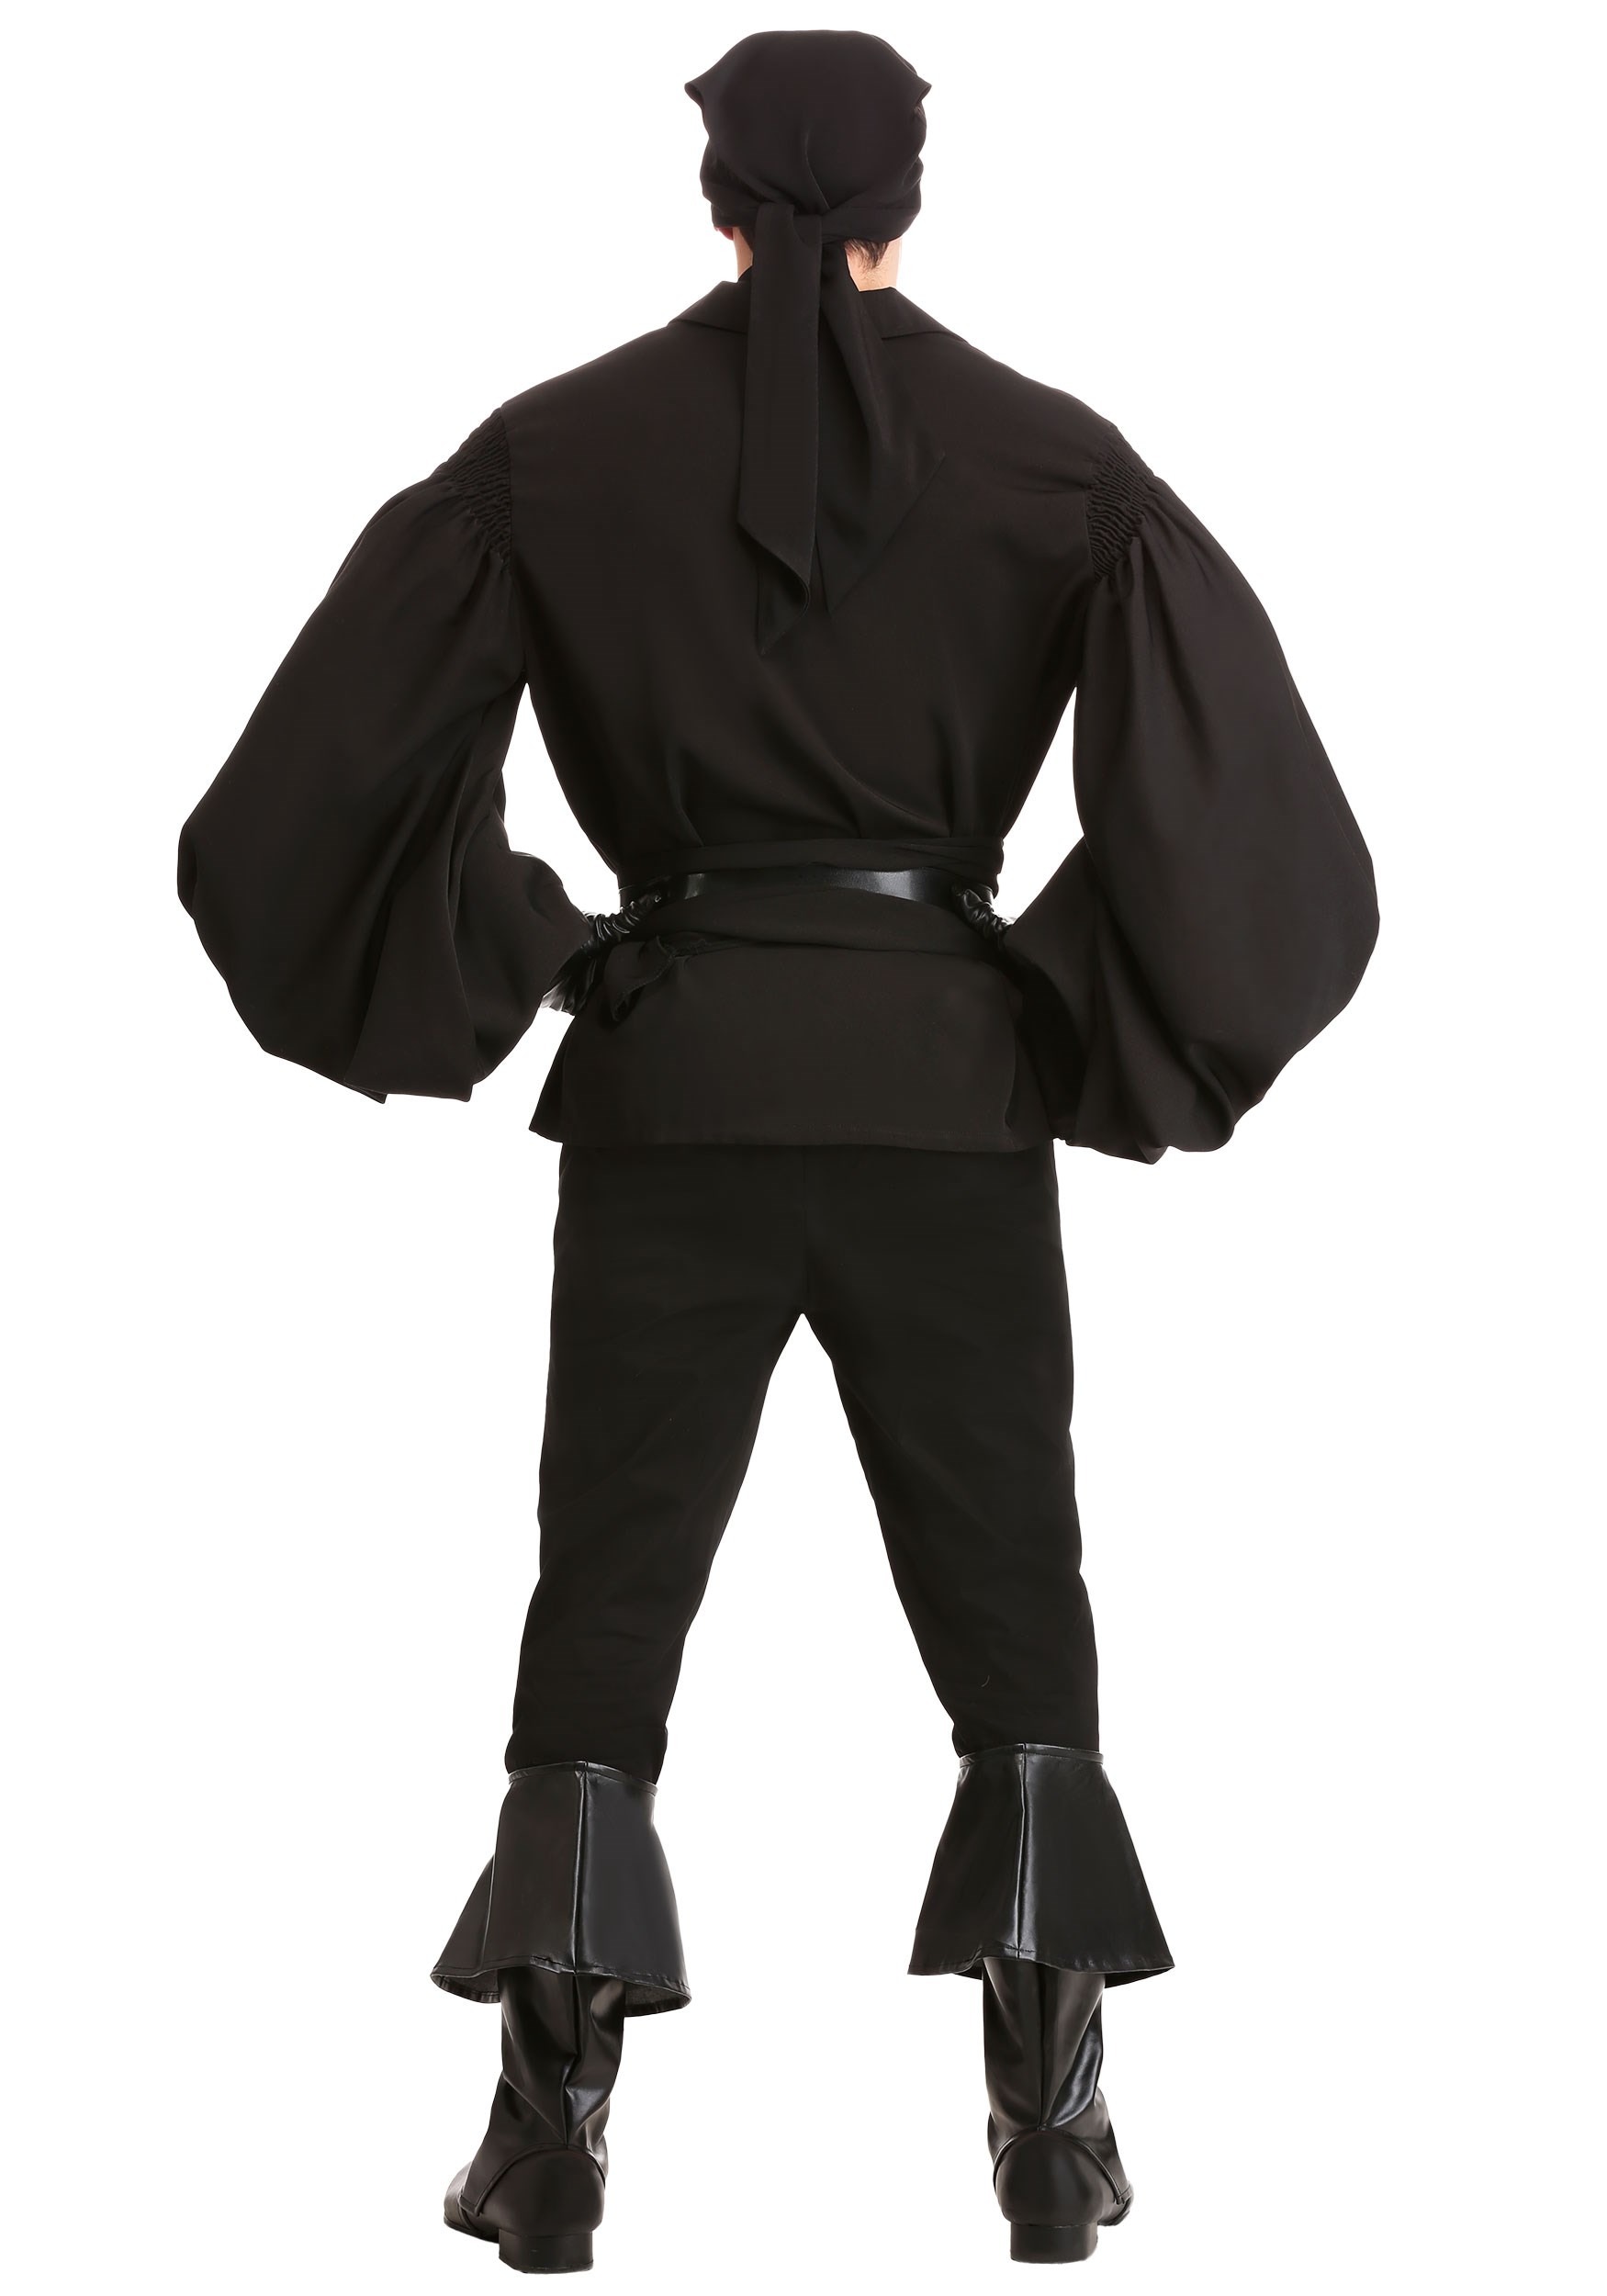 Authentic Westley The Princess Bride Adult Costume